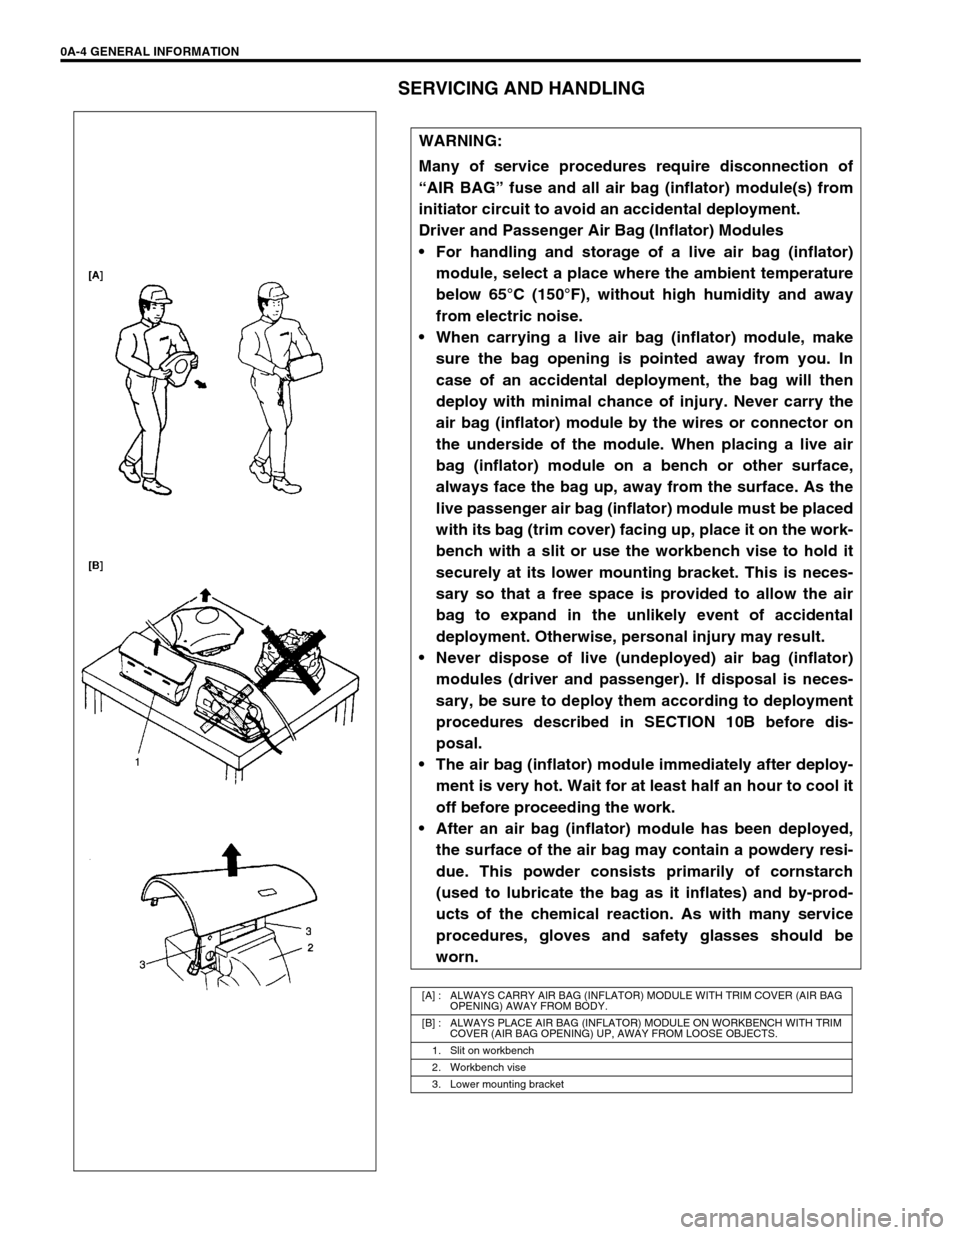 SUZUKI SWIFT 2000 1.G RG413 Service Workshop Manual 0A-4 GENERAL INFORMATION
SERVICING AND HANDLING
WARNING:
Many of service procedures require disconnection of
“AIR BAG” fuse and all air bag (inflator) module(s) from
initiator circuit to avoid an 